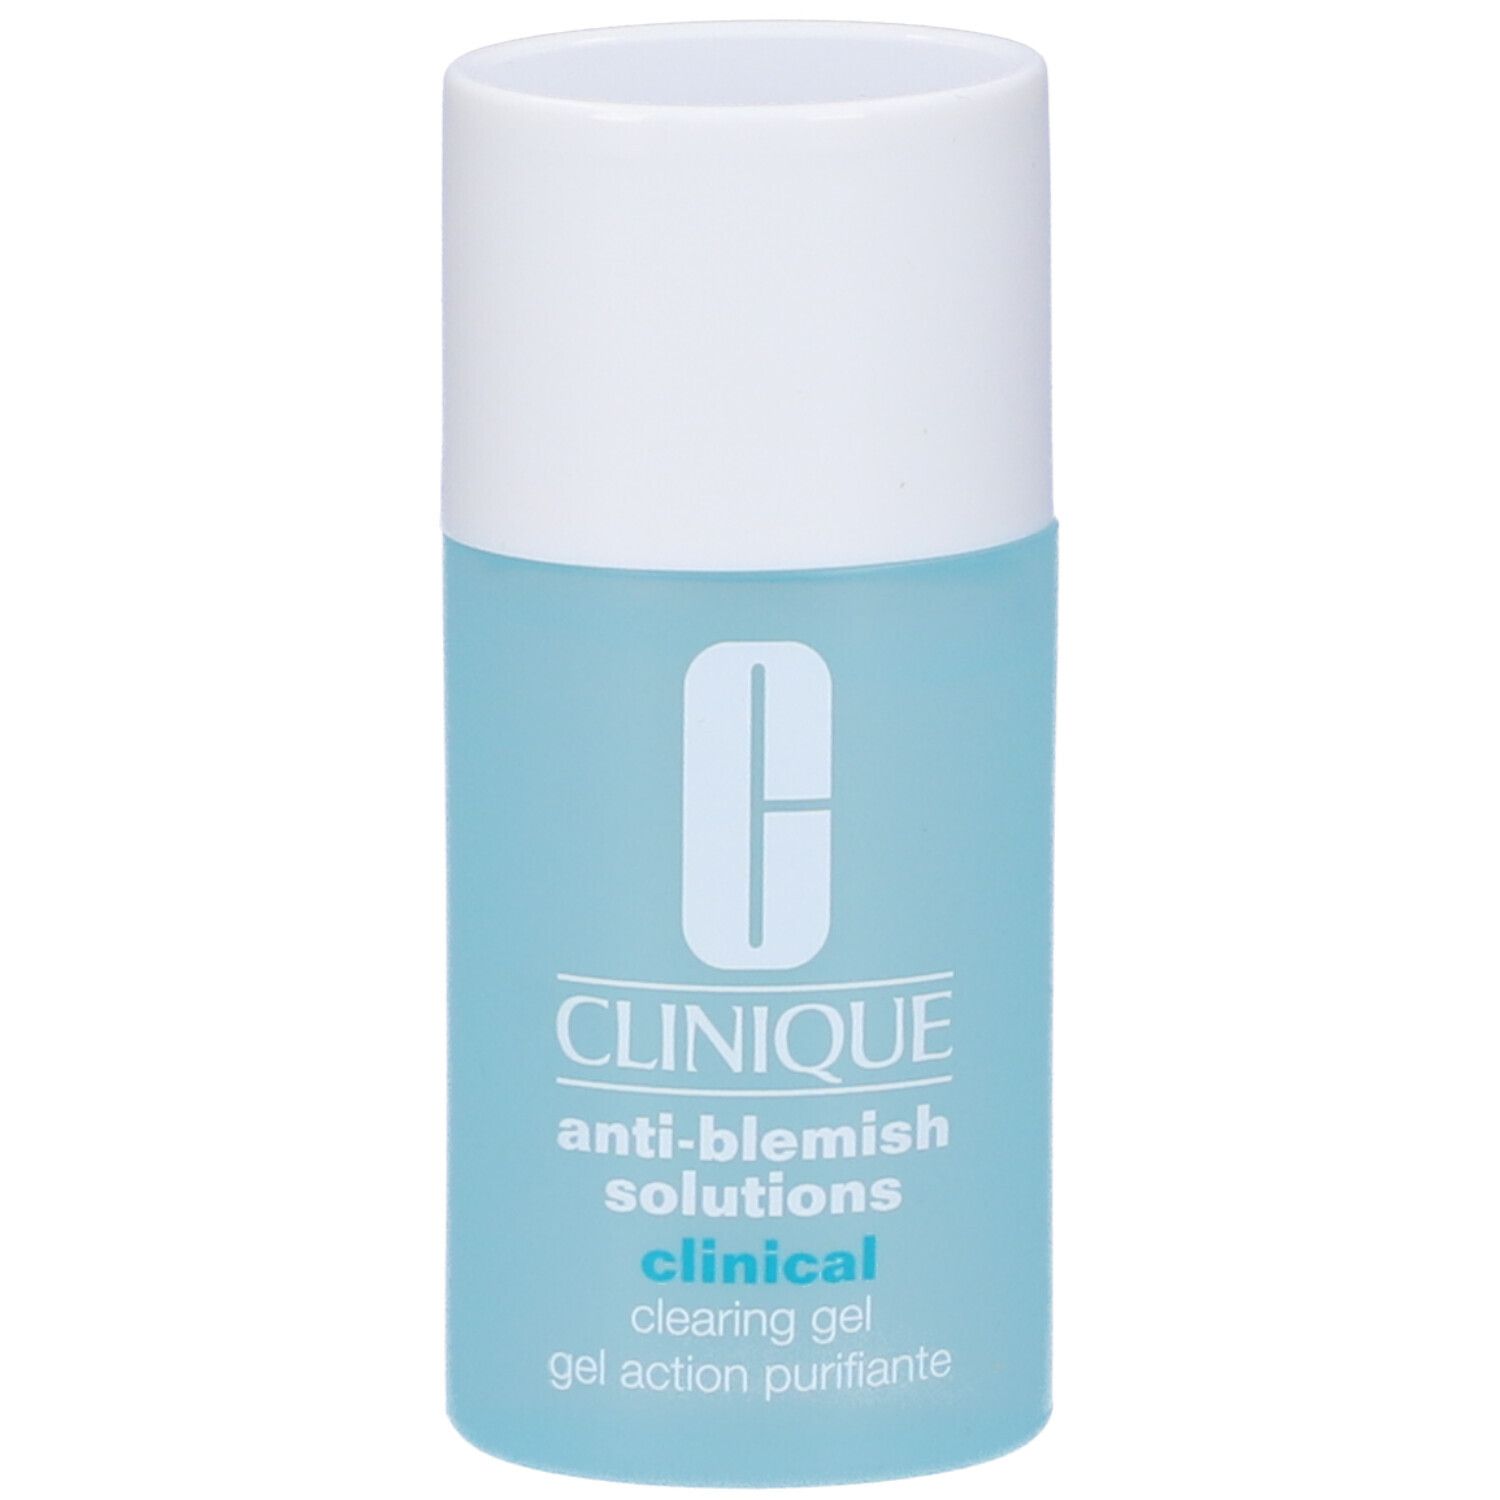 Image of Clinique Anti-blemish Solutions Clinical Clearing Gel